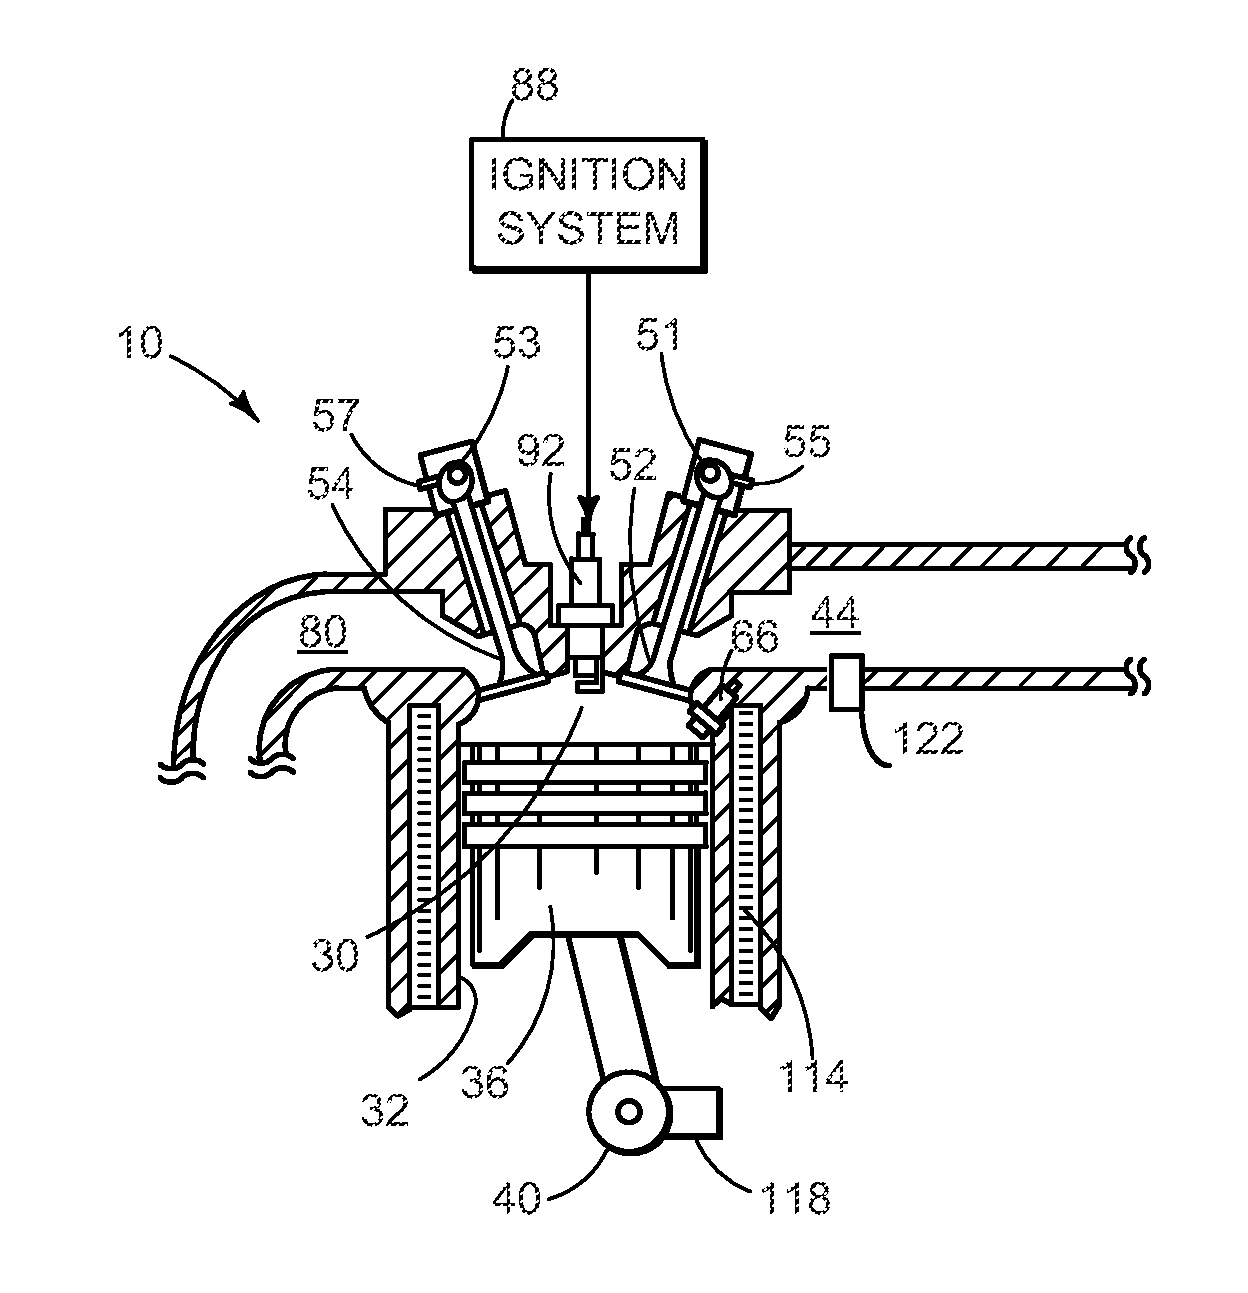 Method and system for turbocharging an engine